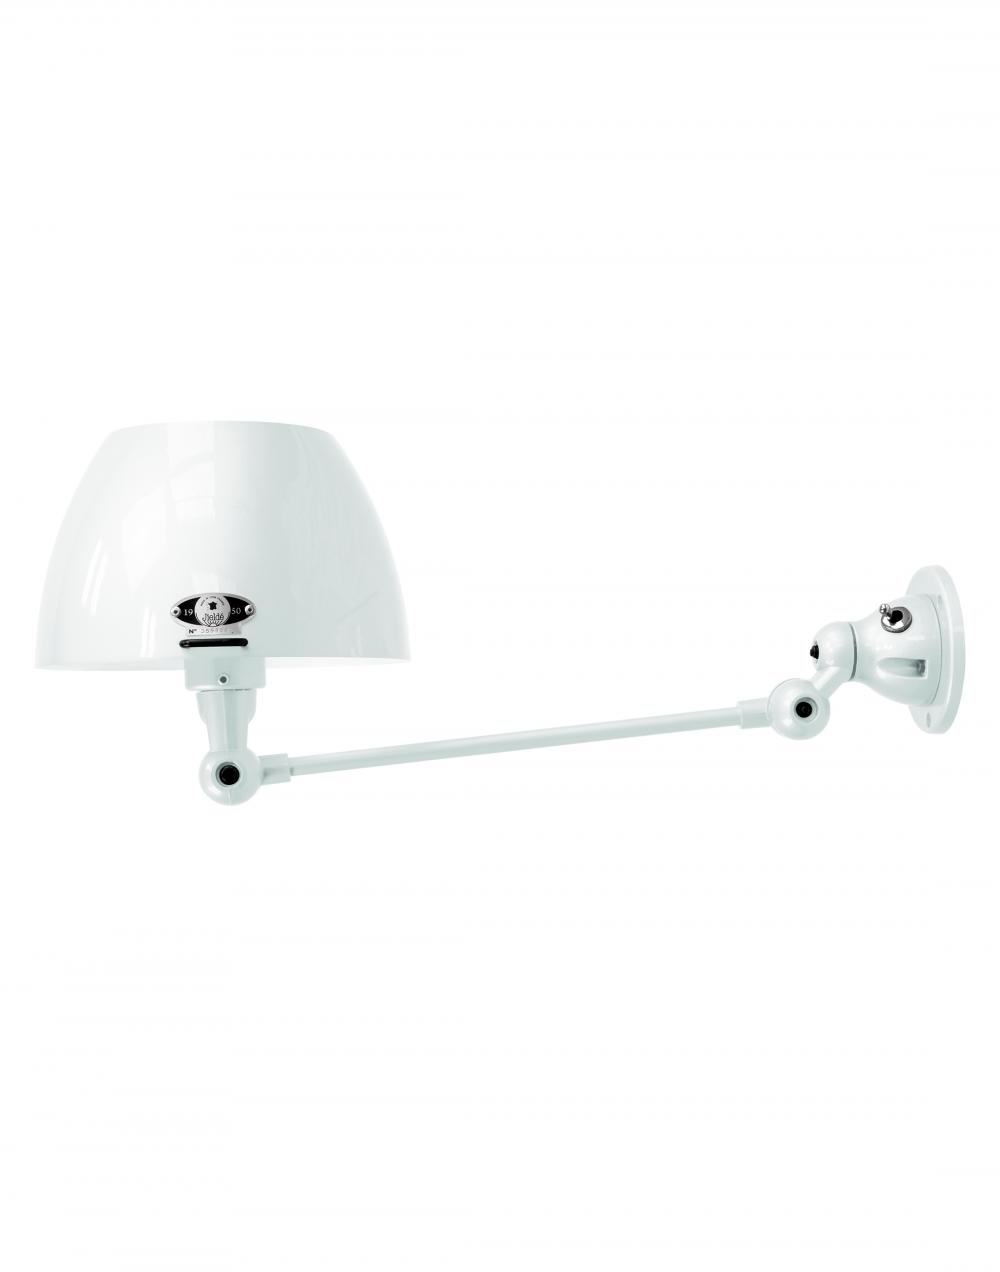 Jielde Aicler One Arm Adjustable Wall Light Curved Shade White Gloss Hardwired No Switch